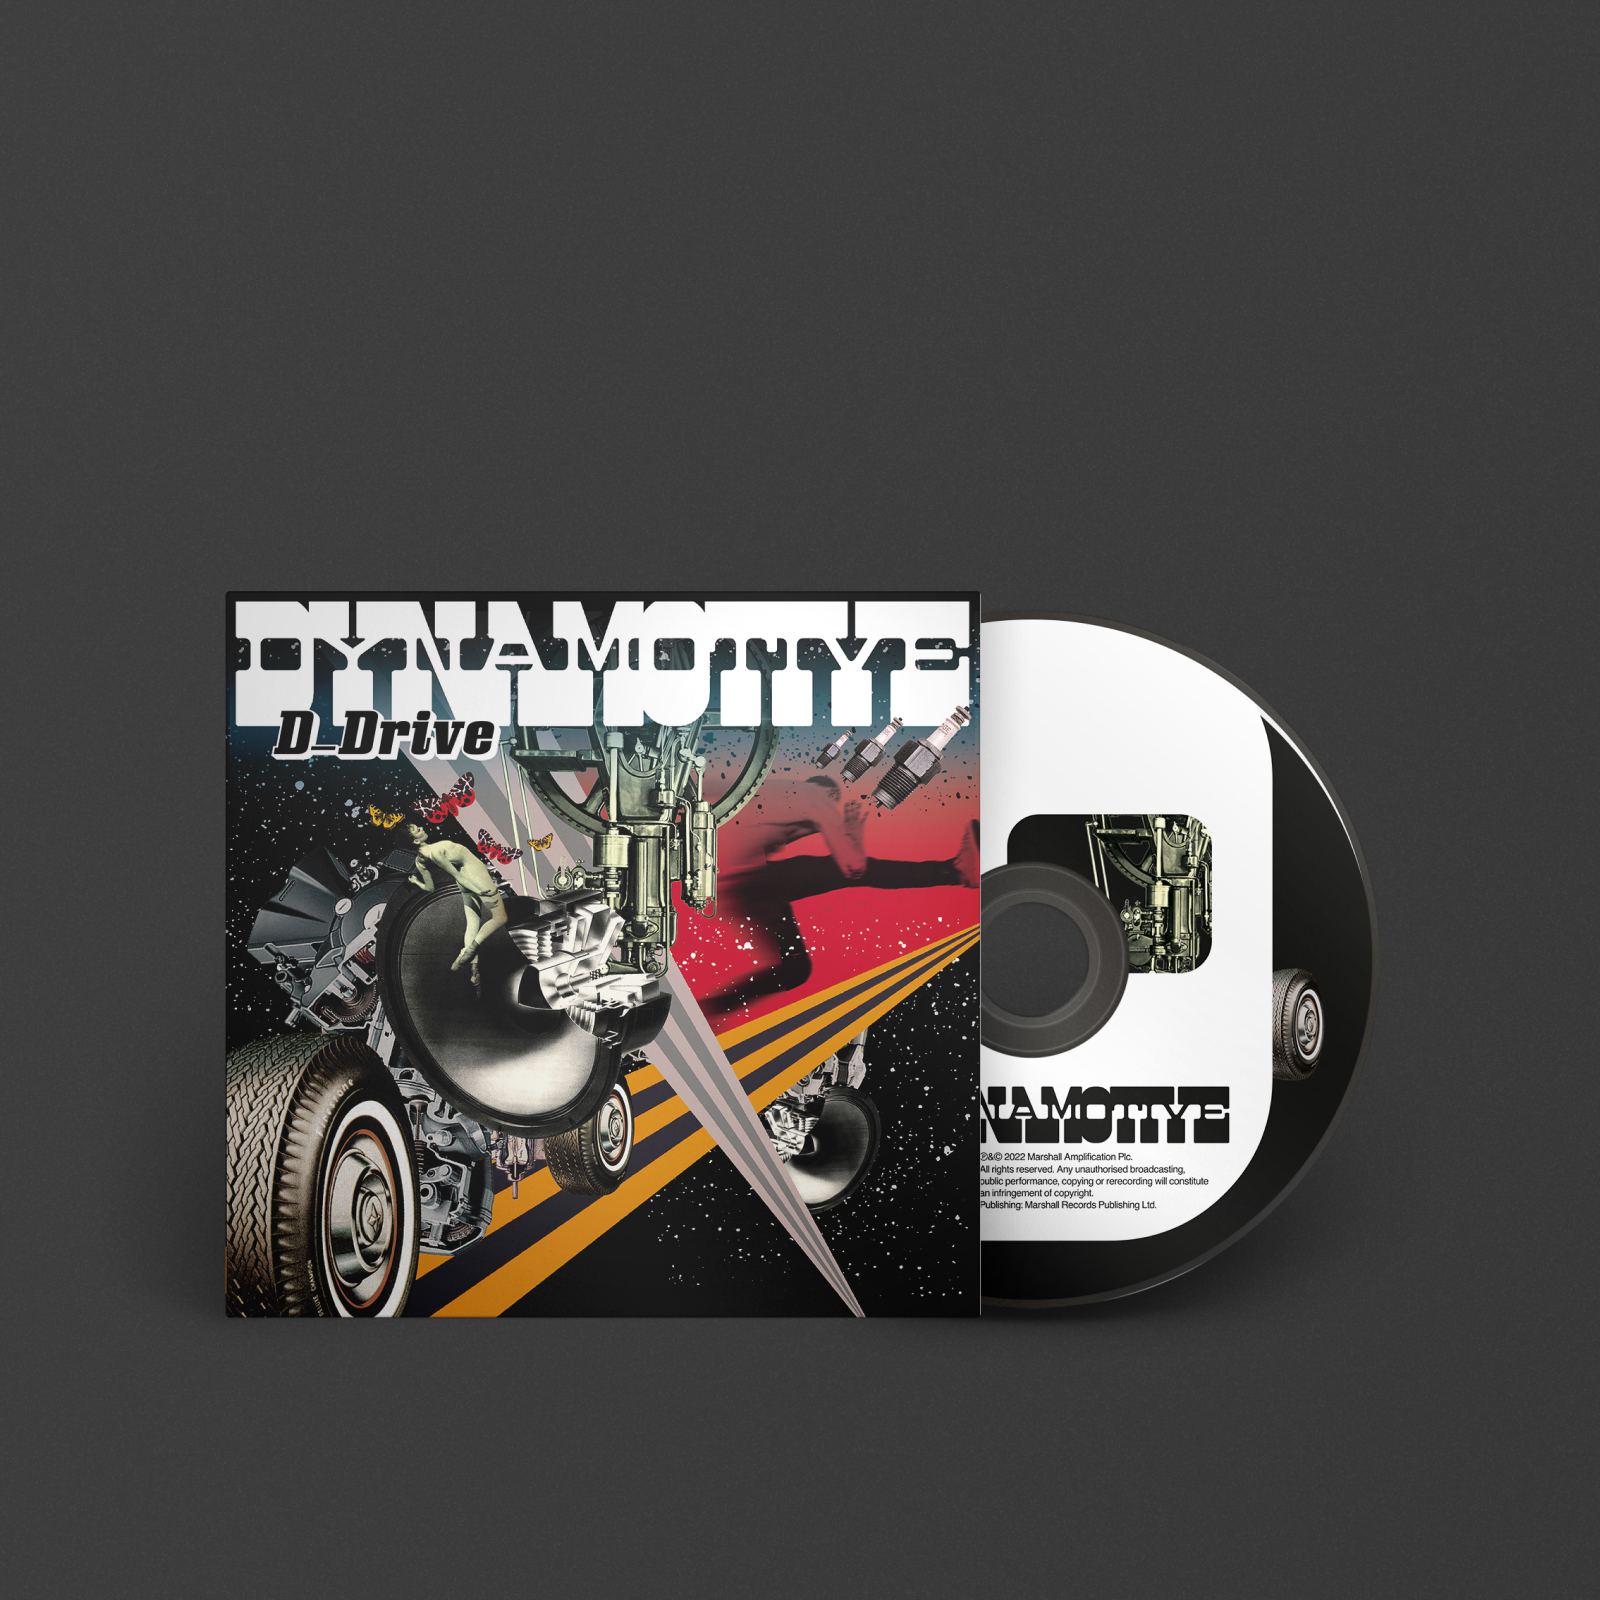 A DYNAMOTIVE D_DRIVE featuring a vibrant image of a motorcycle, perfect for music enthusiasts.